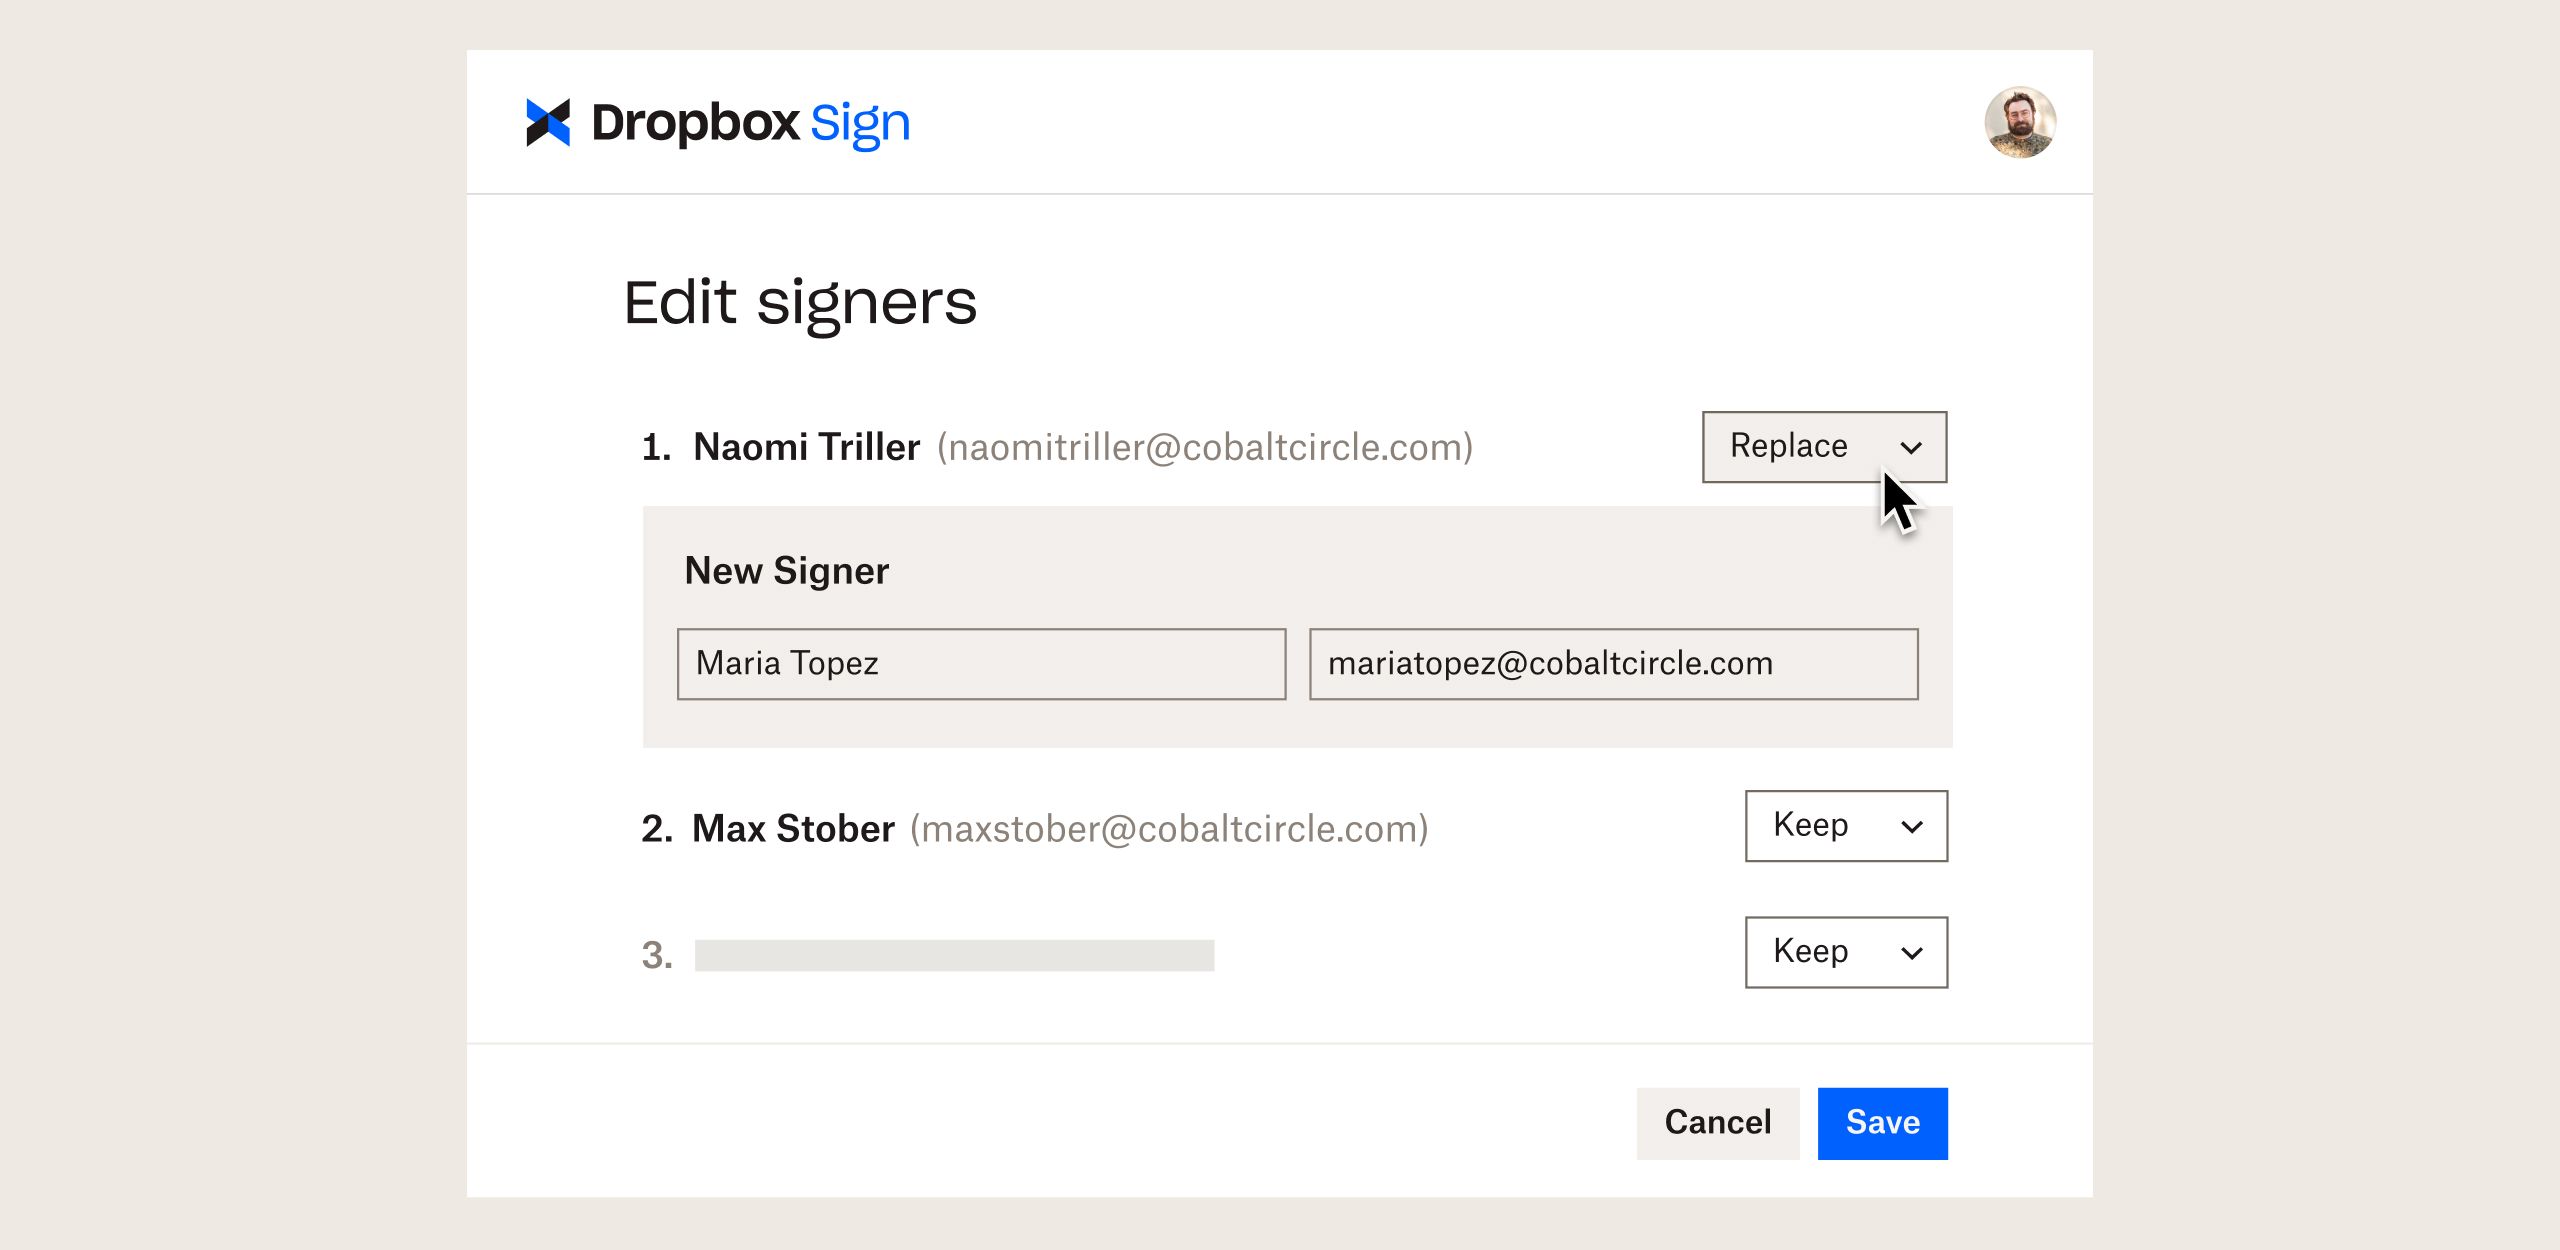 Product UI shows how to manage signers in Dropbox Sign